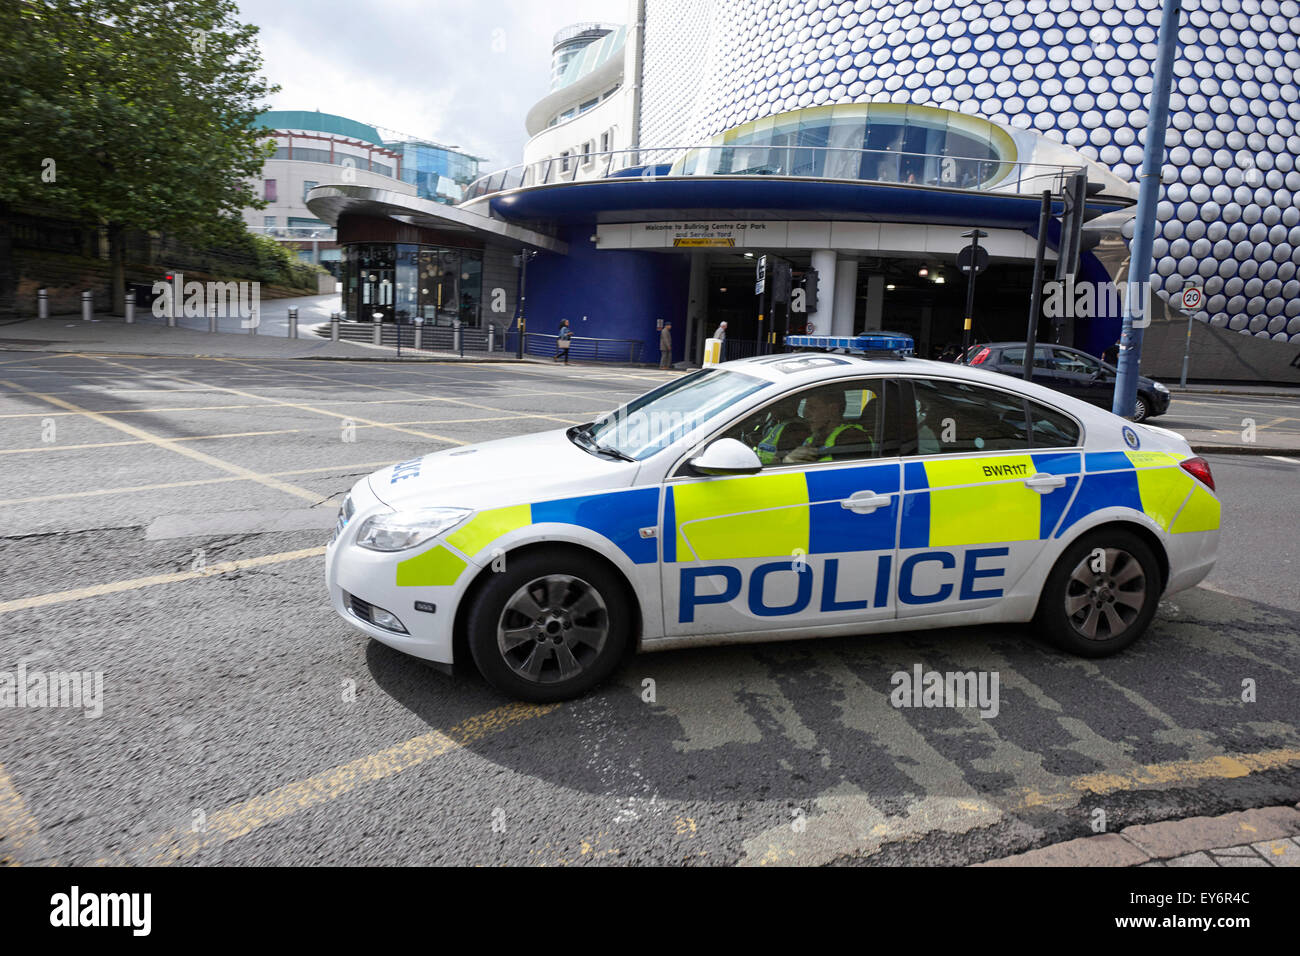 West Midlands police patrol car responding to call out in city centre Birmingham, UK Stock Photo